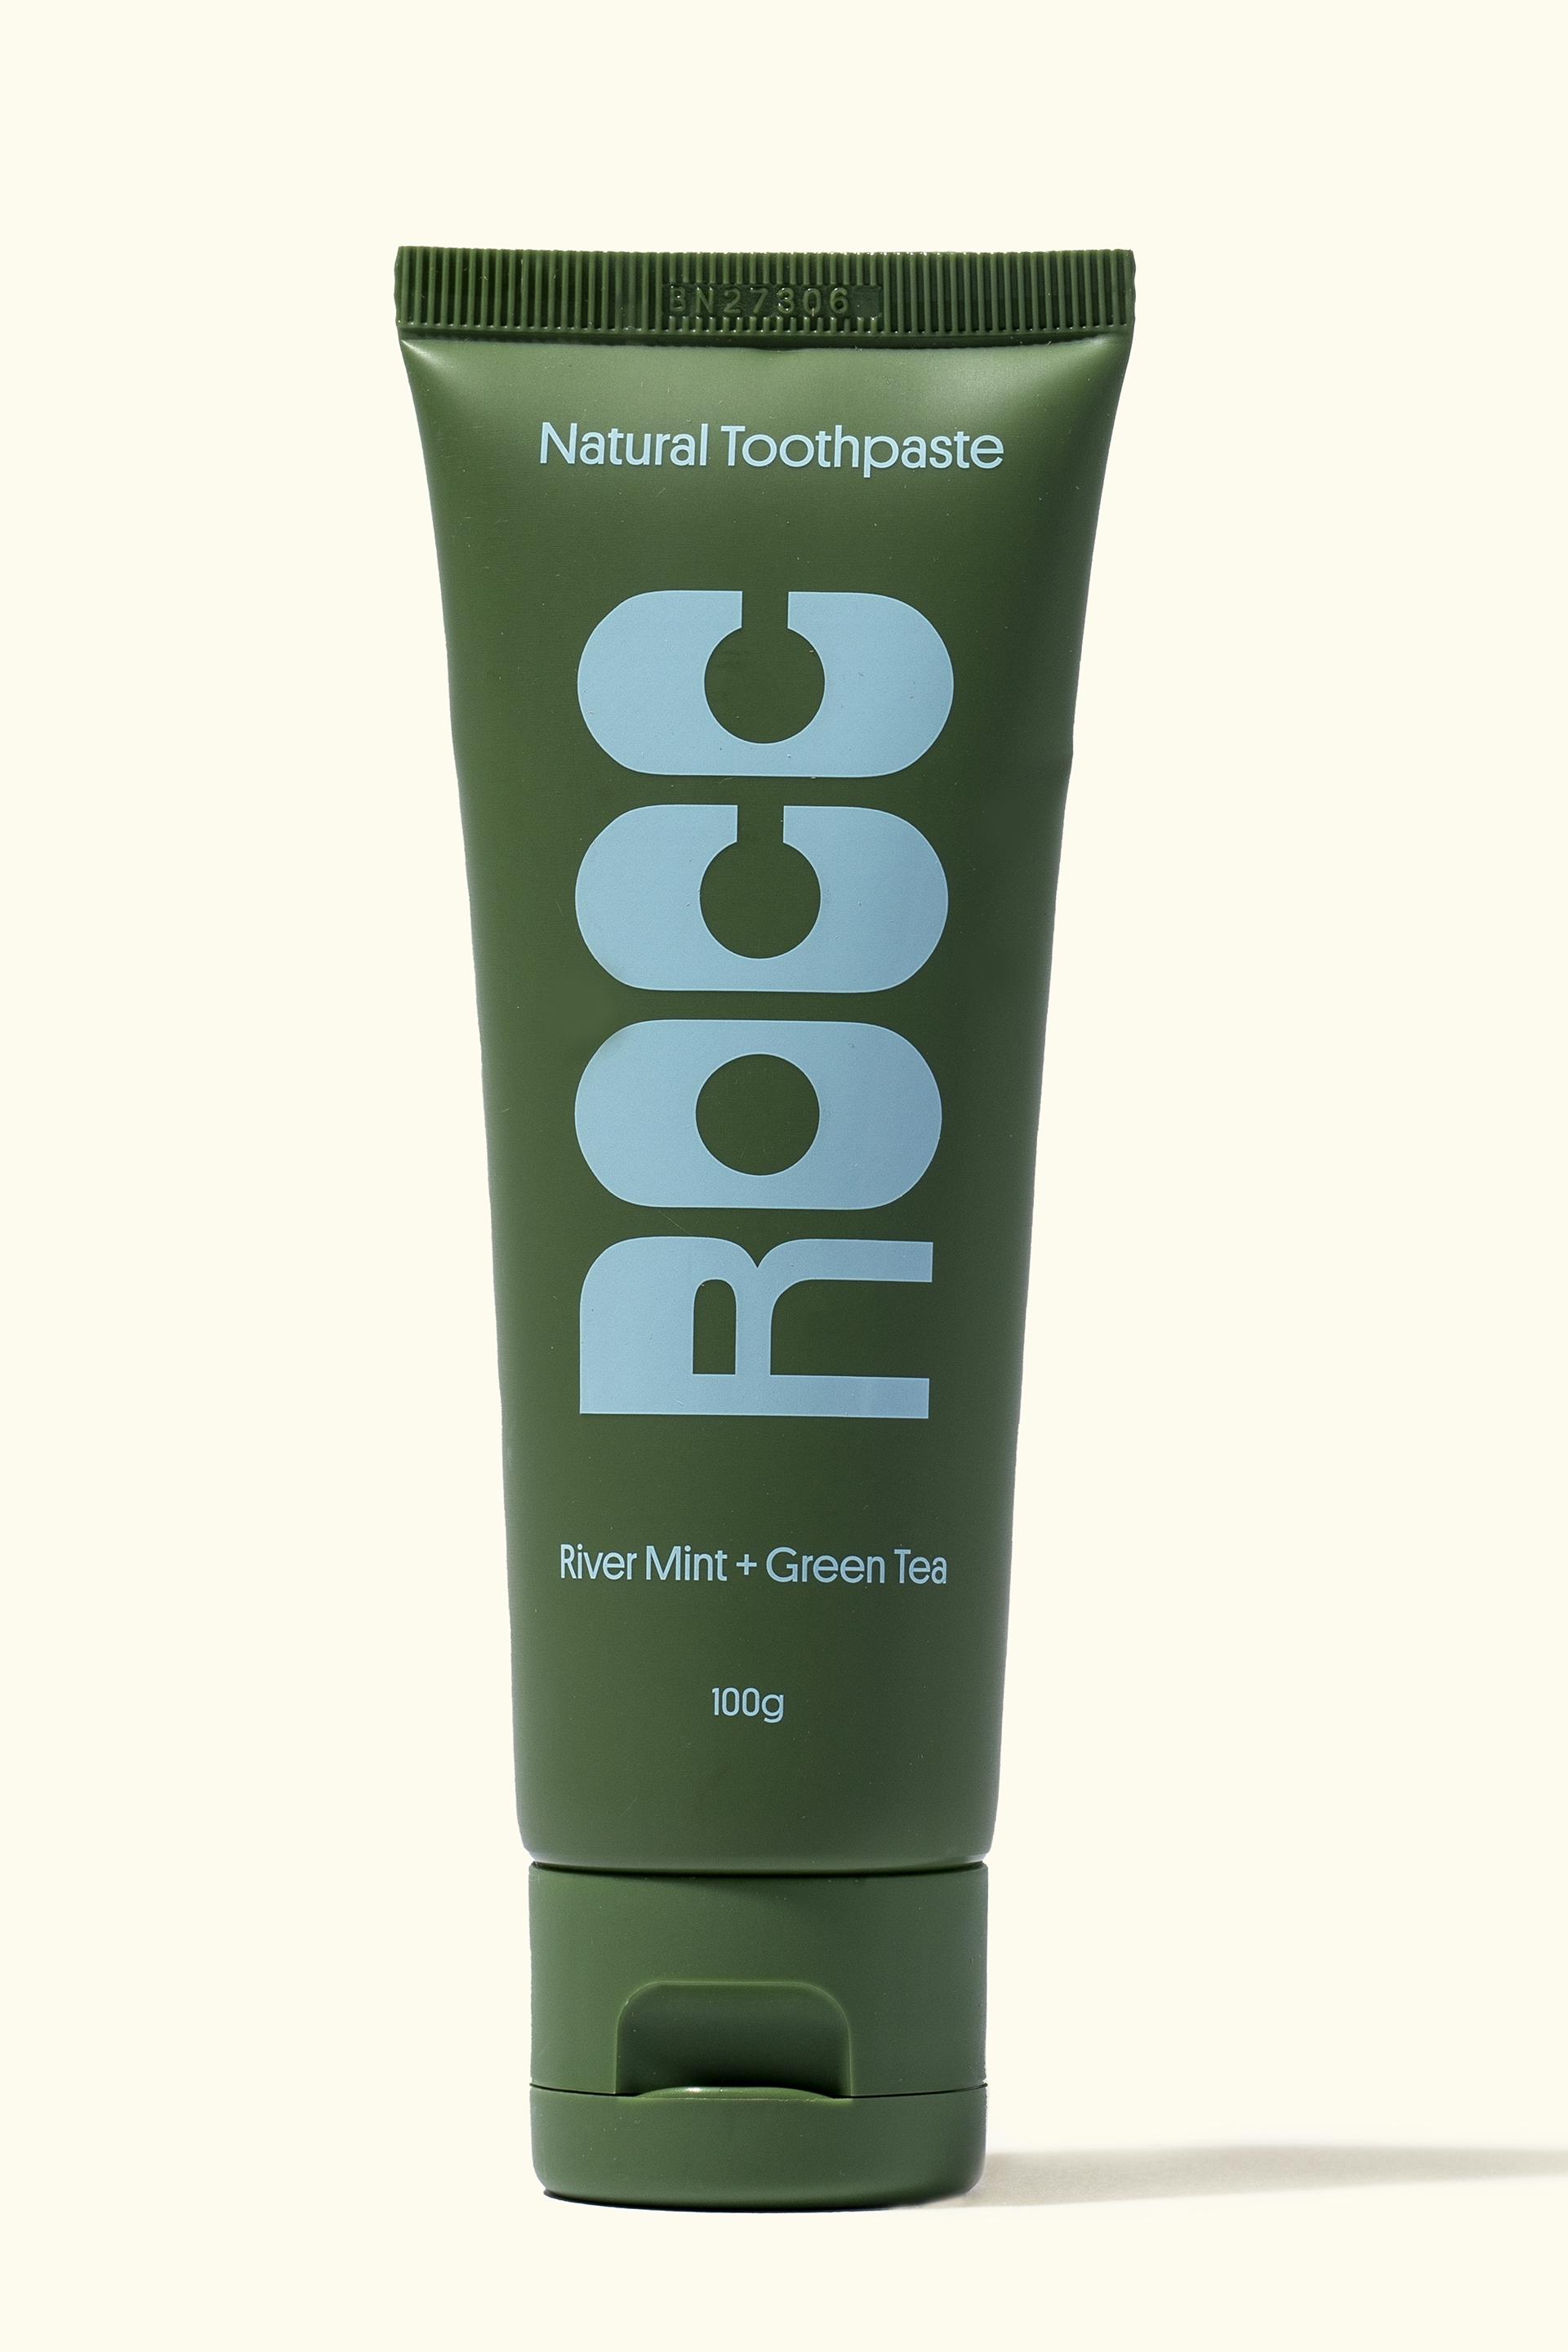 Cotton On Foundation - Rocc Natural Toothpaste - Mint & green tea